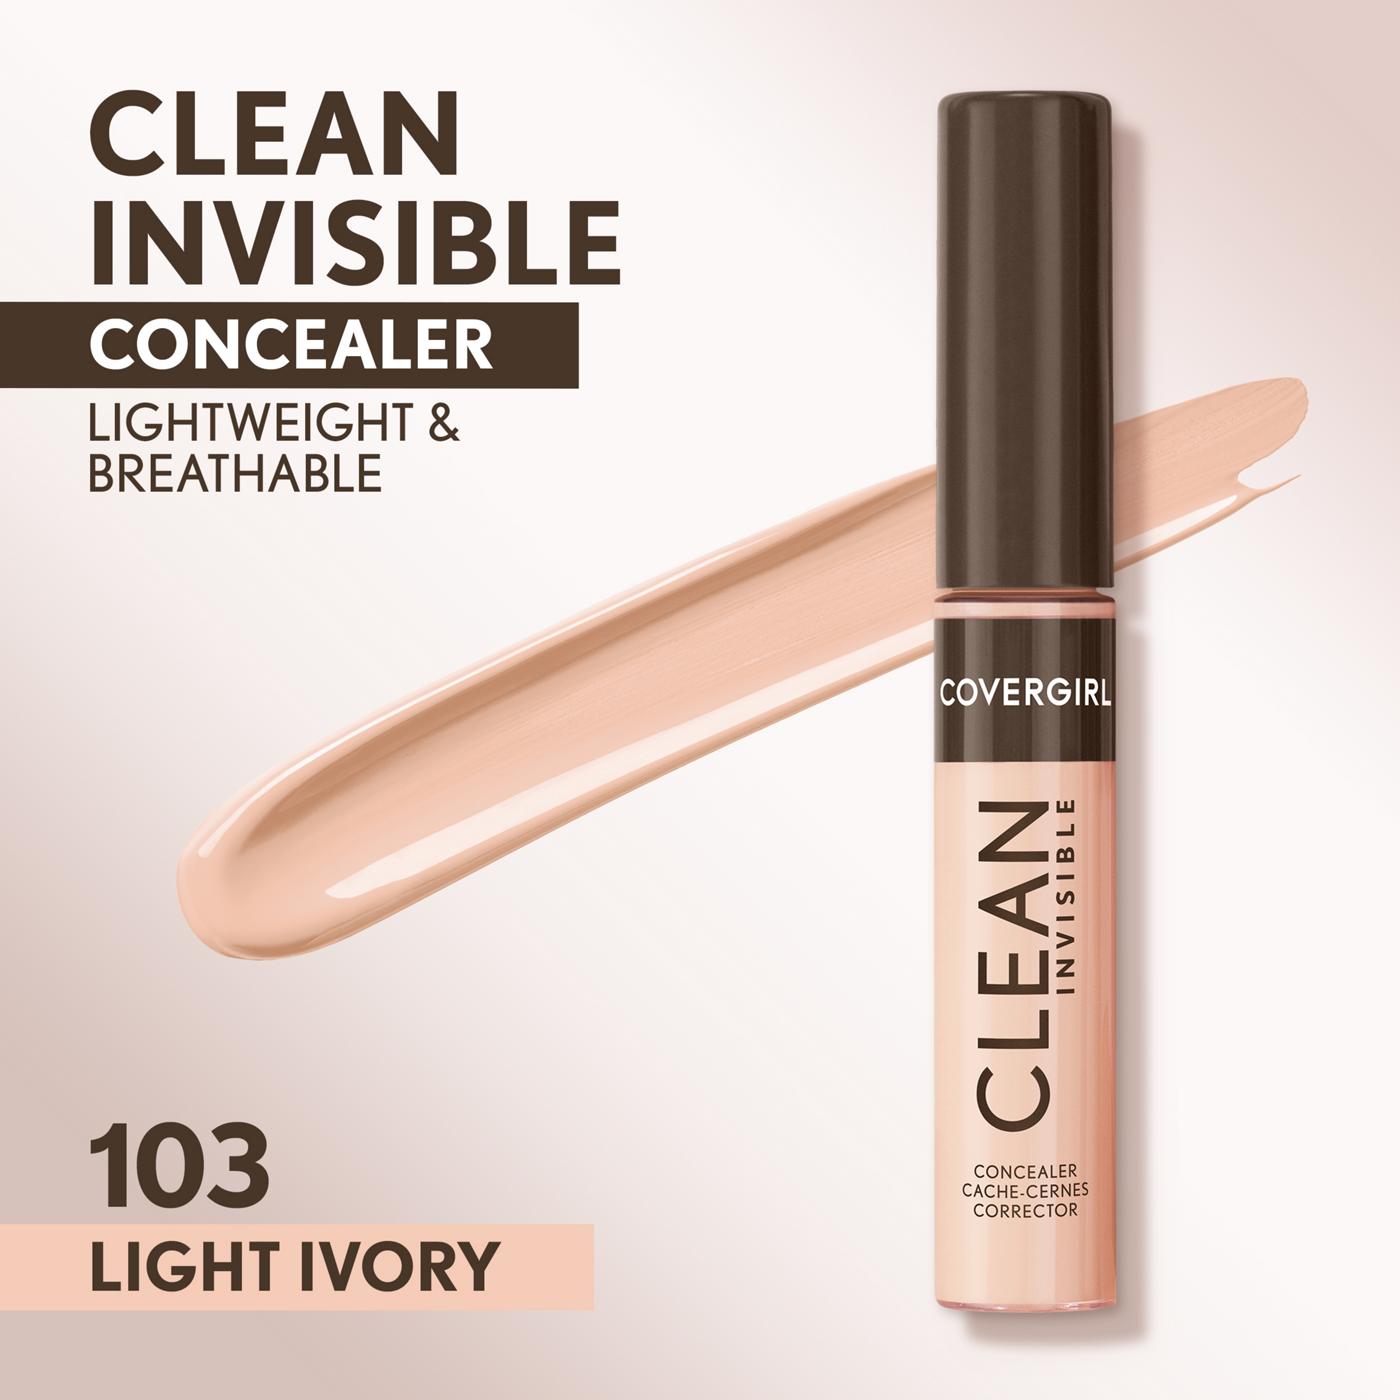 Covergirl Clean Invisible Concealer - Light Ivory; image 11 of 15